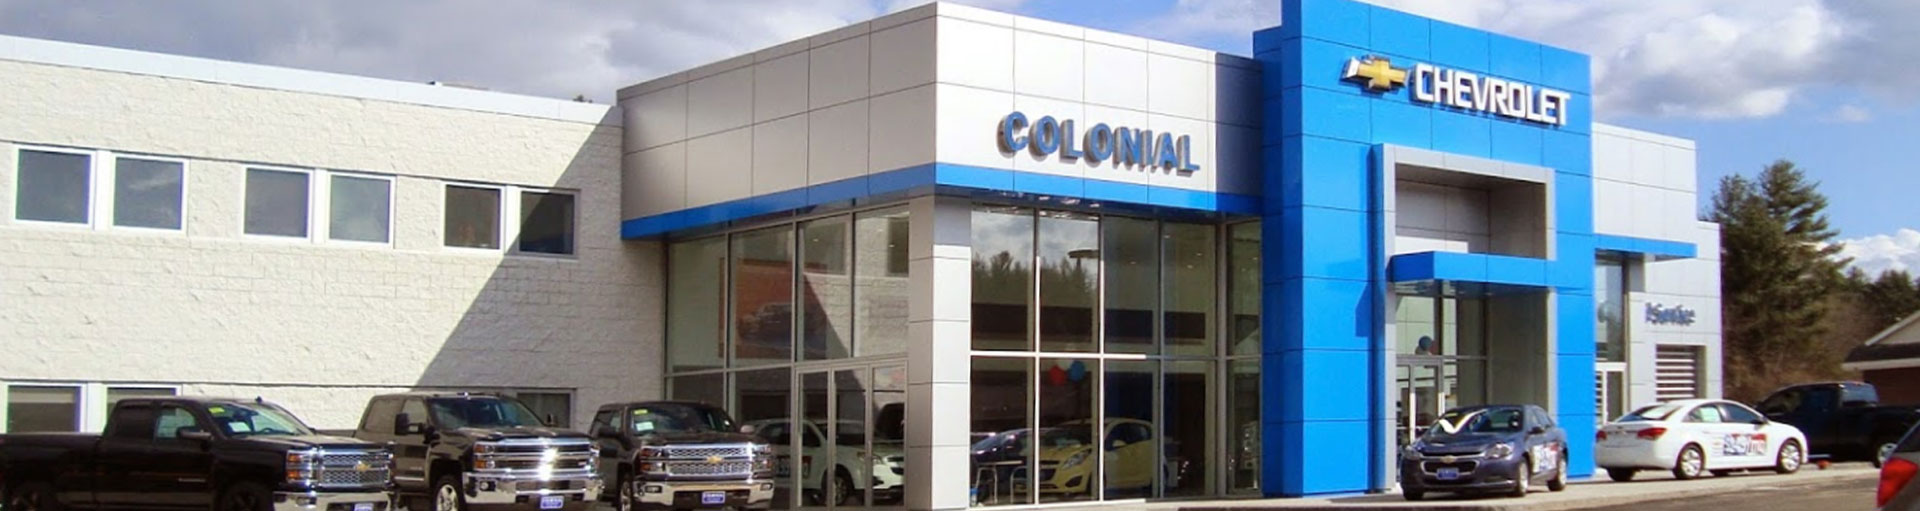 Colonial Chevrolet of Acton Alignment Services